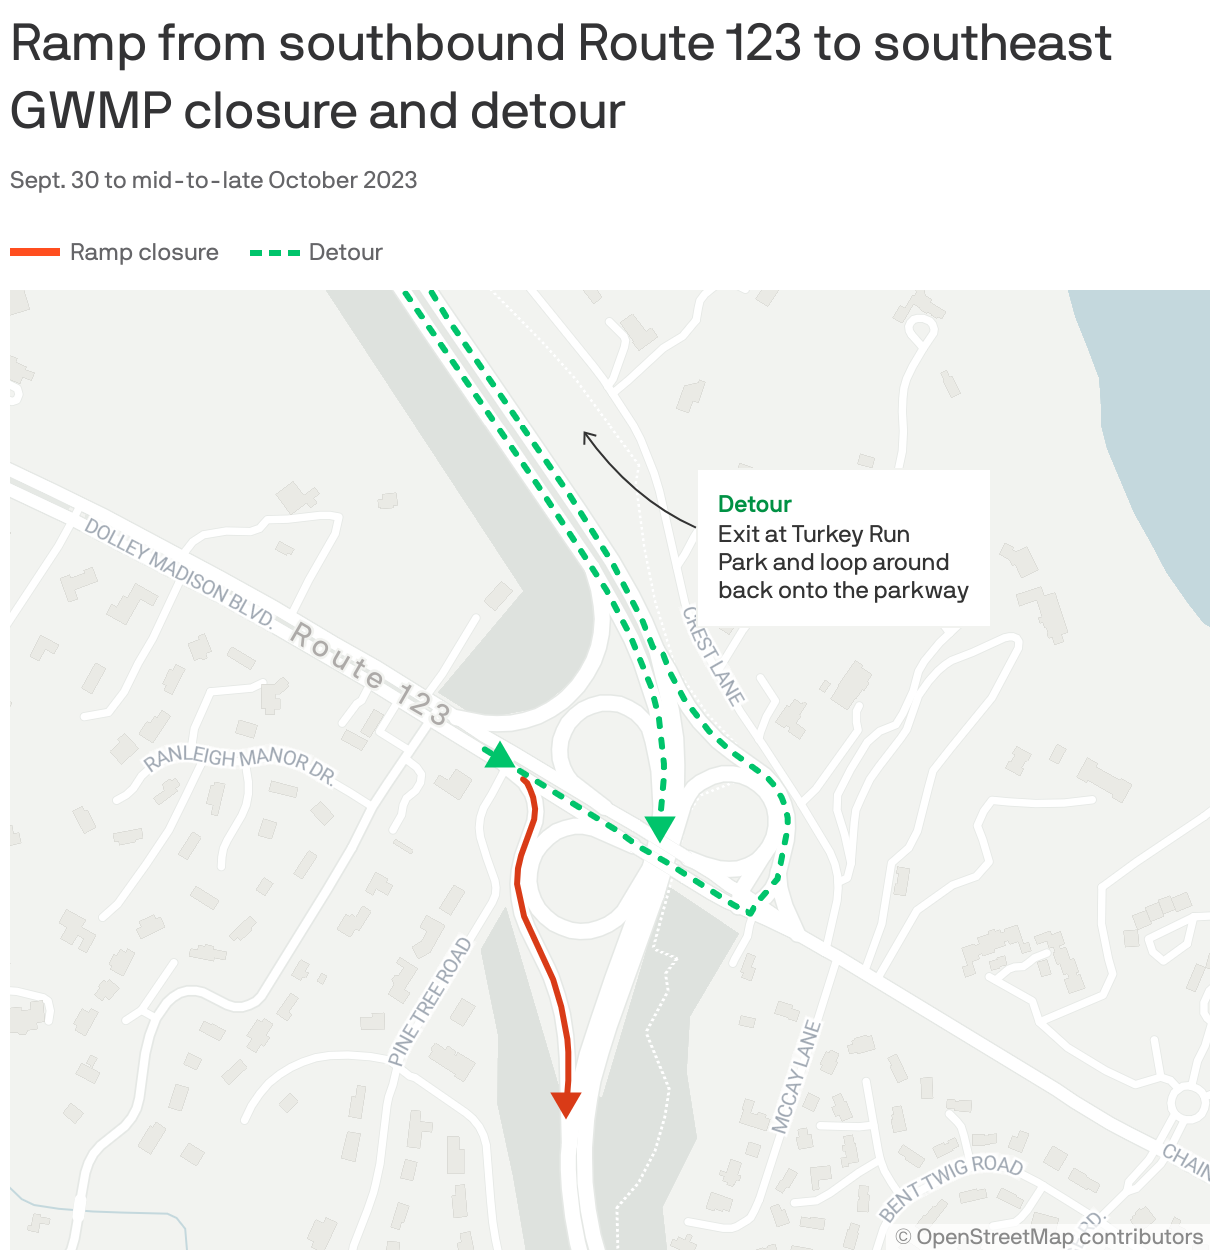 Ramp from southbound Route 123 to southeast GWMP closure and detour